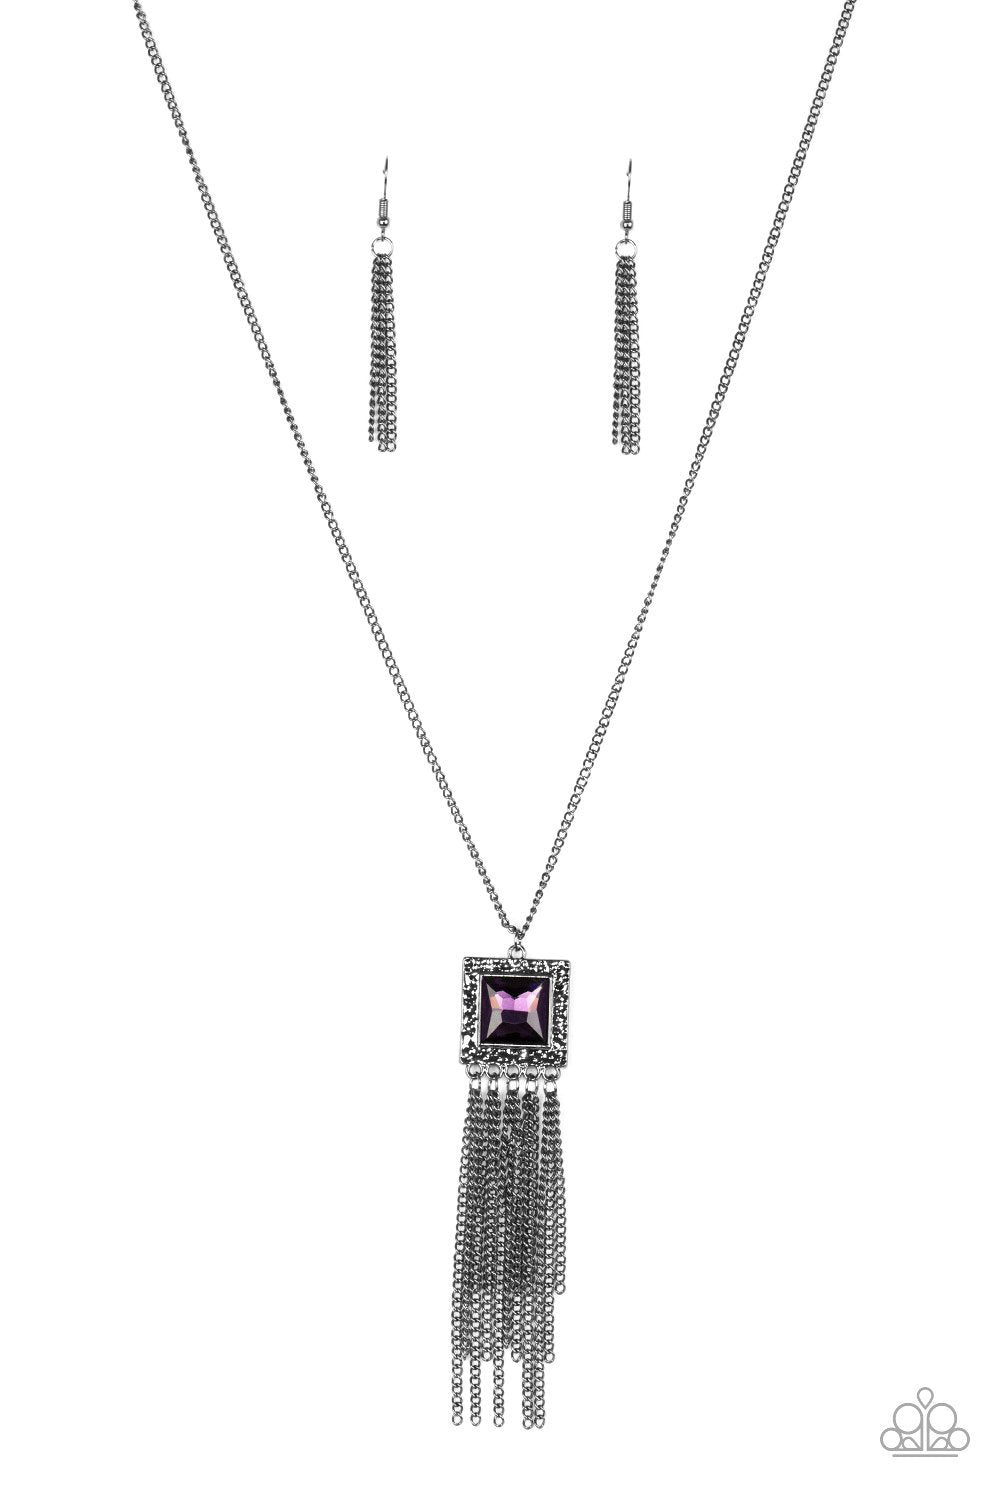 Shimmer Sensei Purple and Gunmetal Necklace - Paparazzi Accessories-CarasShop.com - $5 Jewelry by Cara Jewels